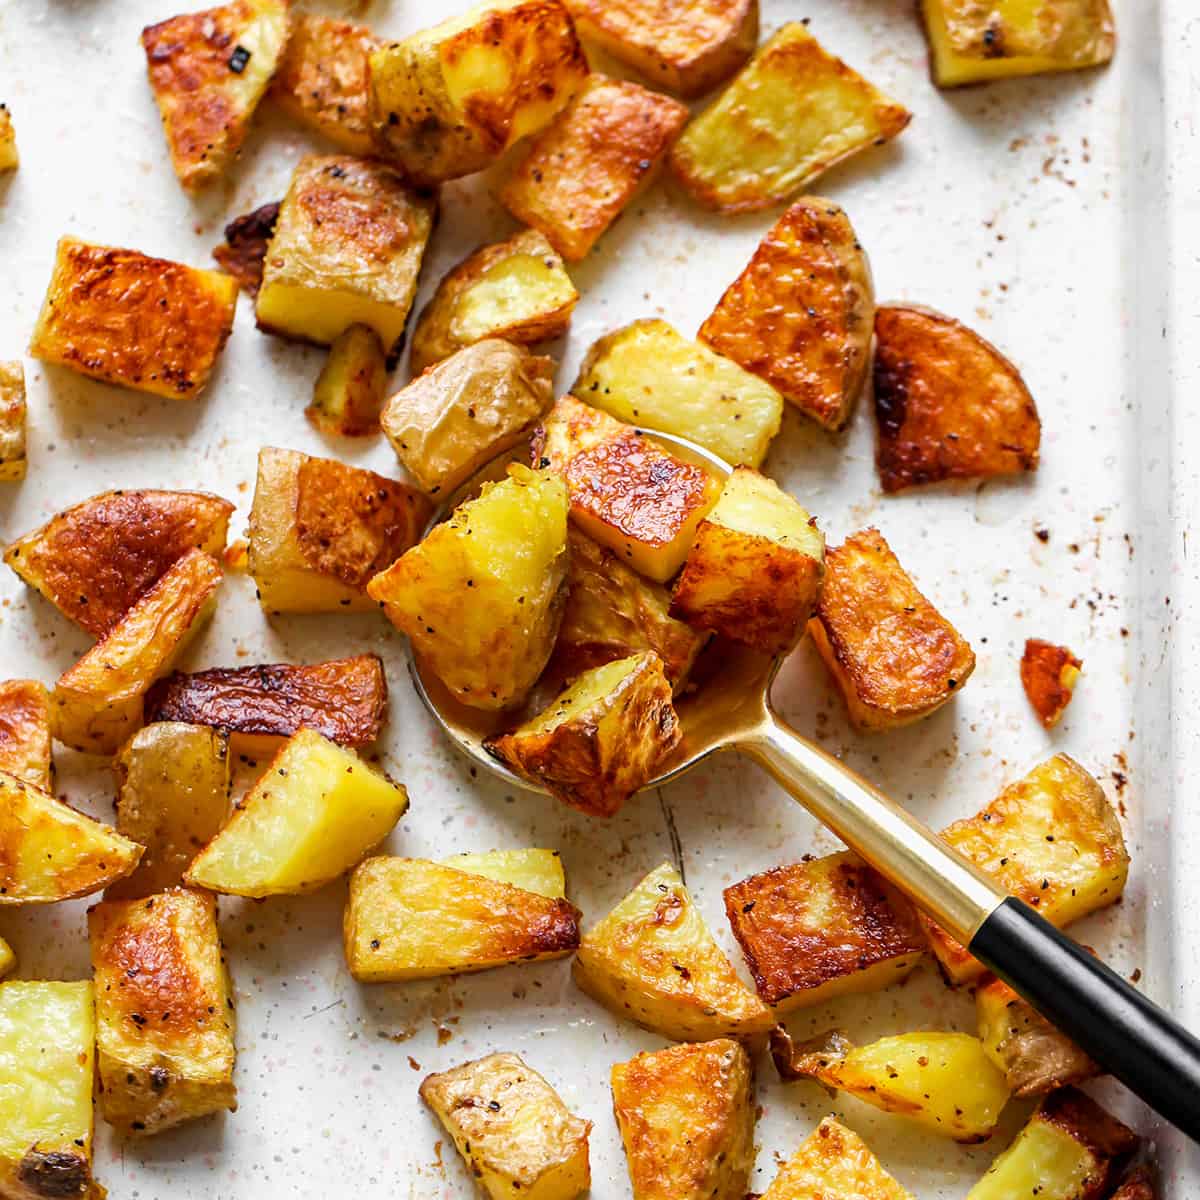 Tips for Achieving Extra Crispy Potatoes